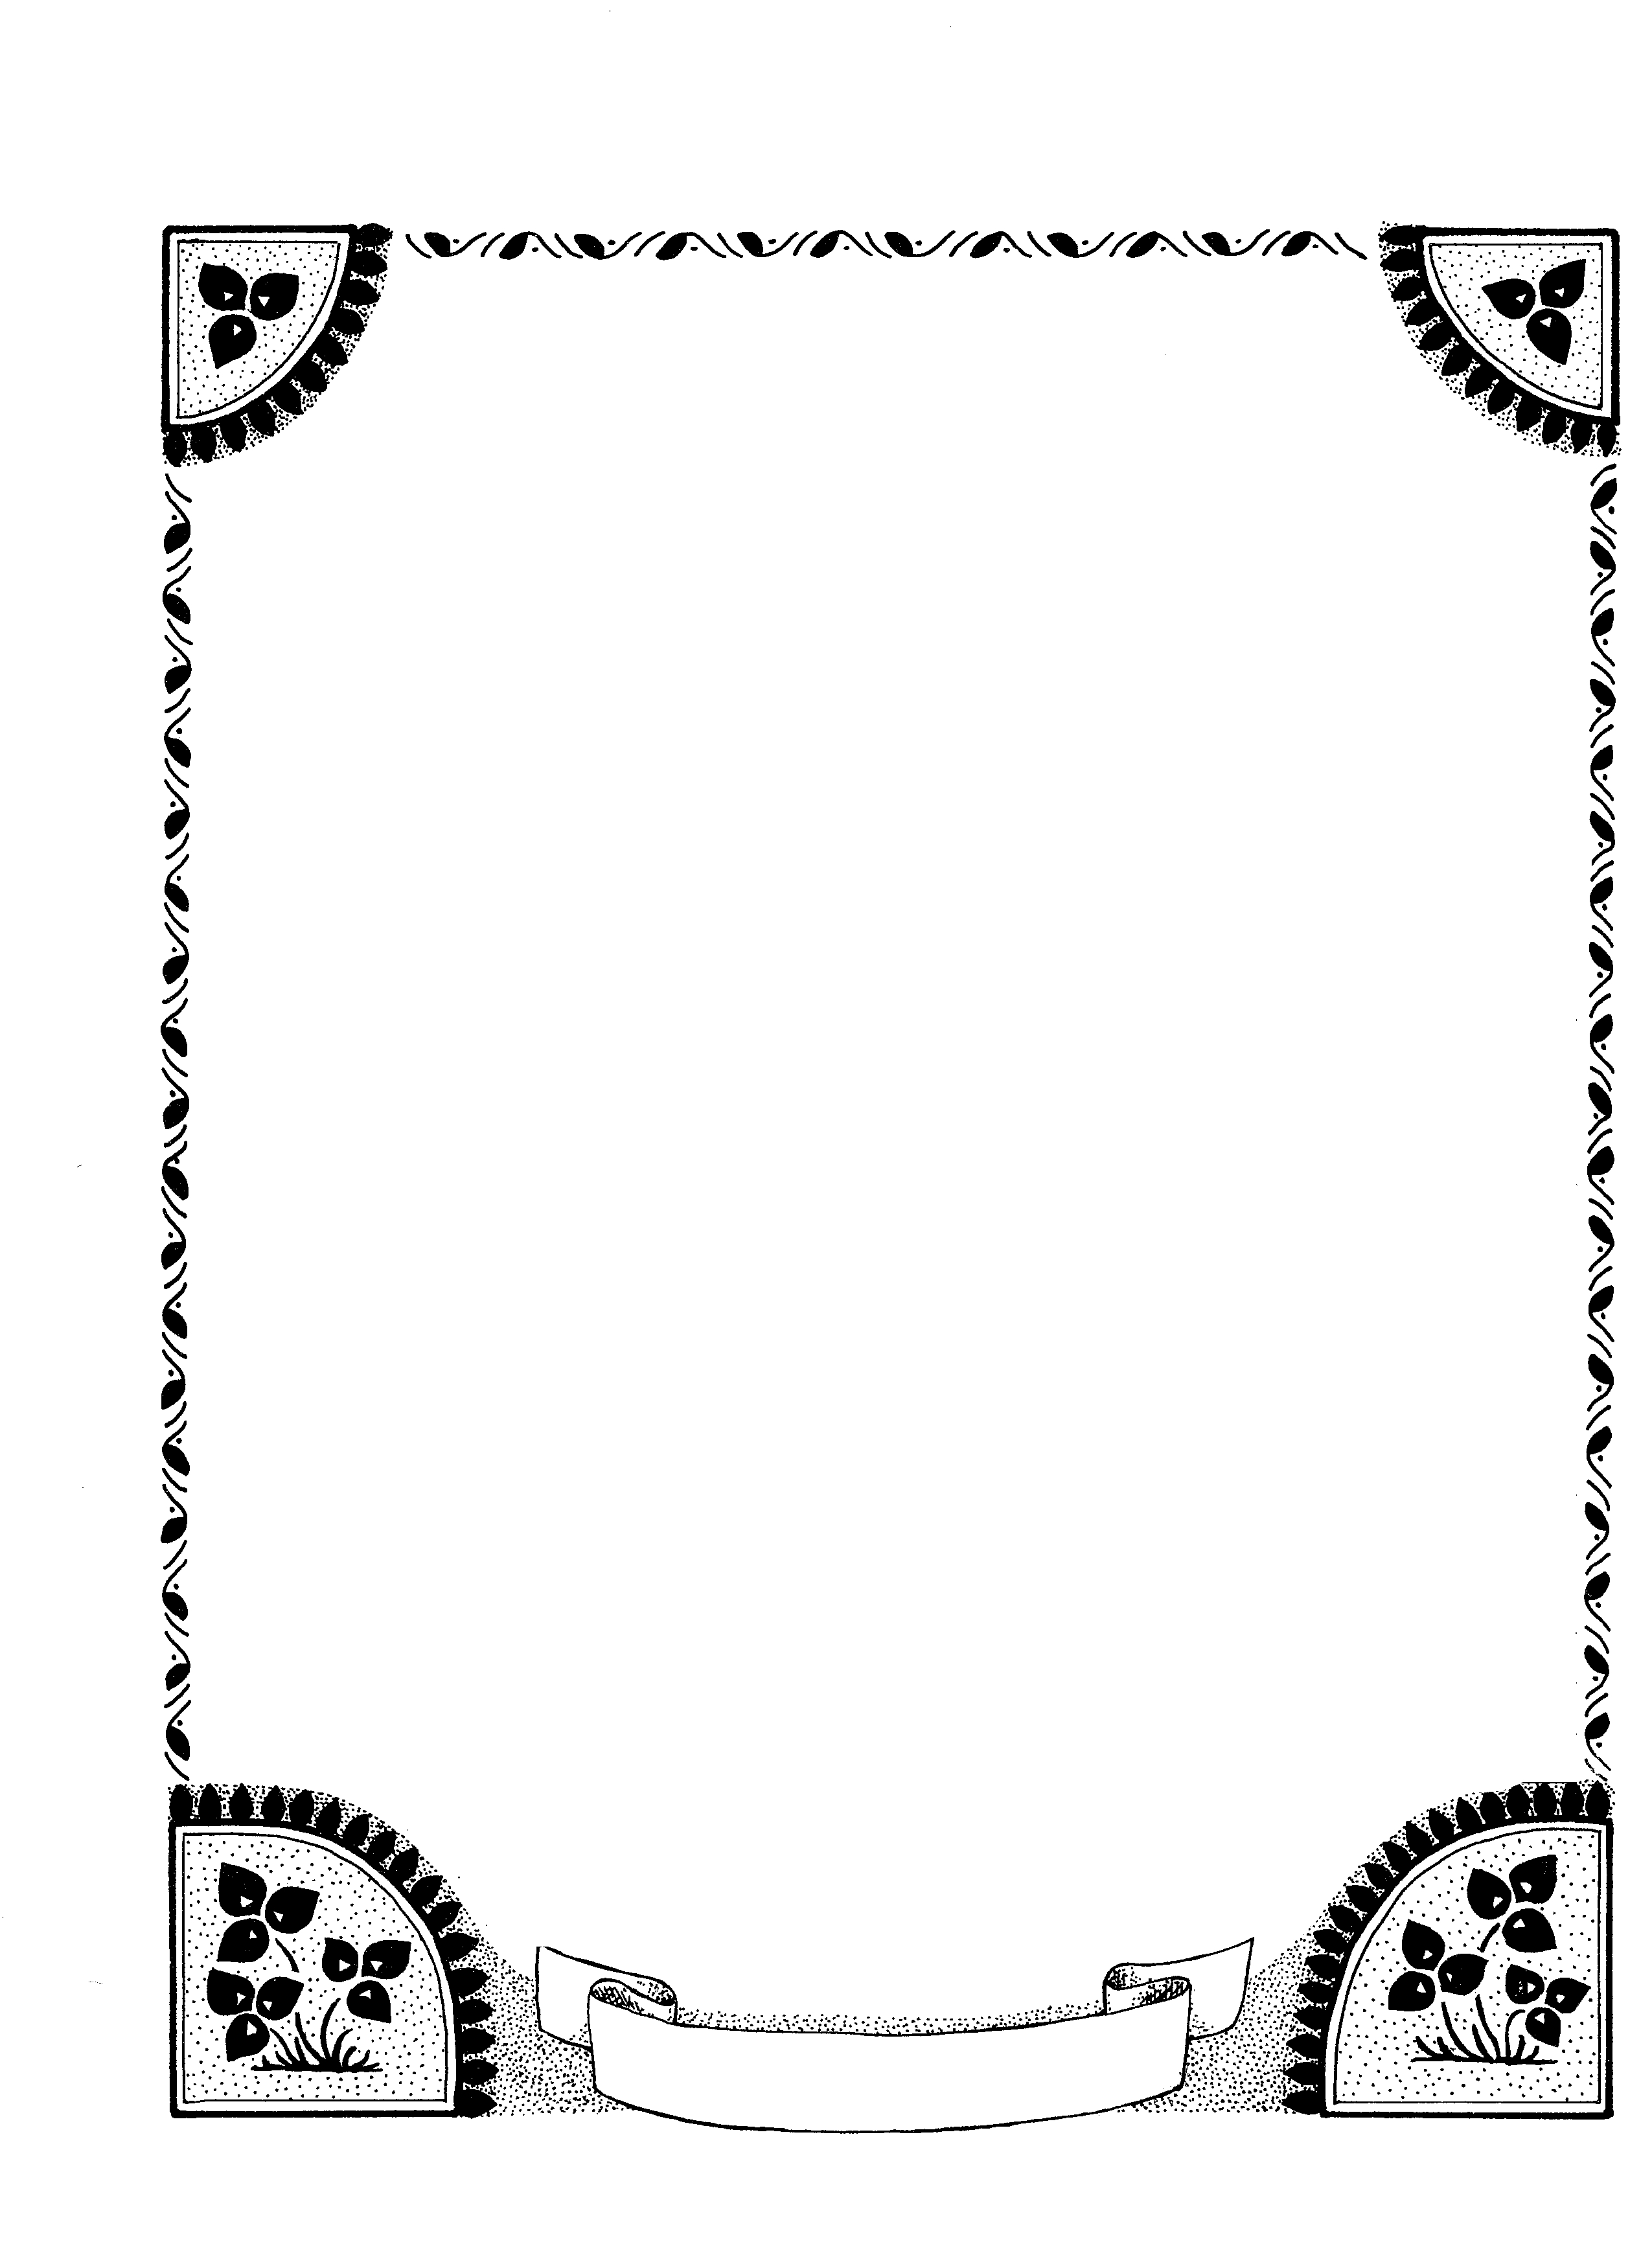 Free Page Border Image, Download Free Page Border Image png image, Free ClipArts on Clipart Library